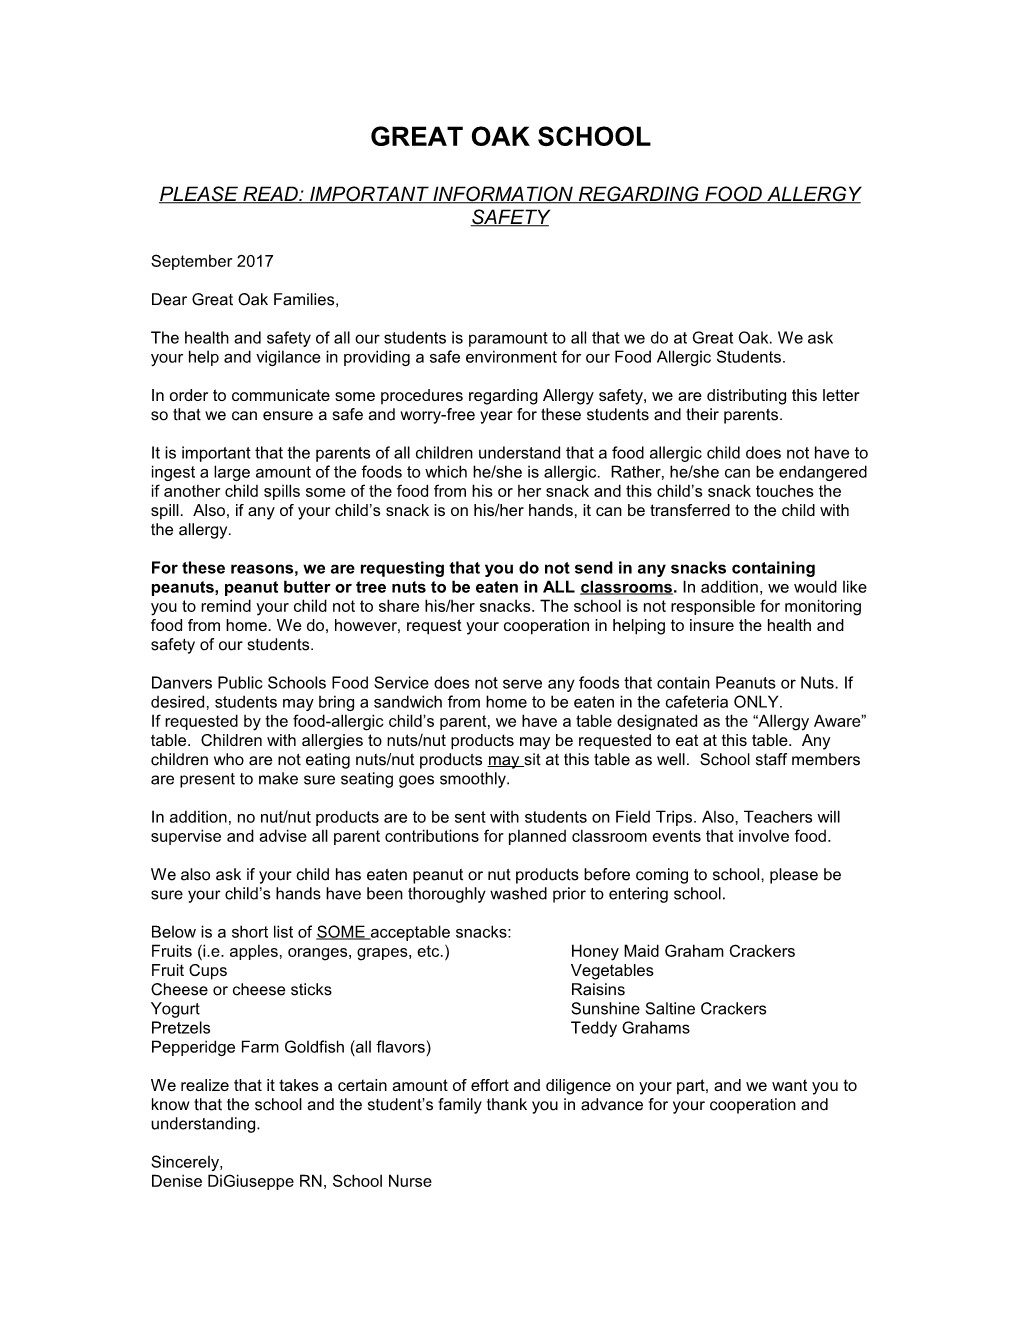 Please Read: Important Information Regarding Food Allergy Safety